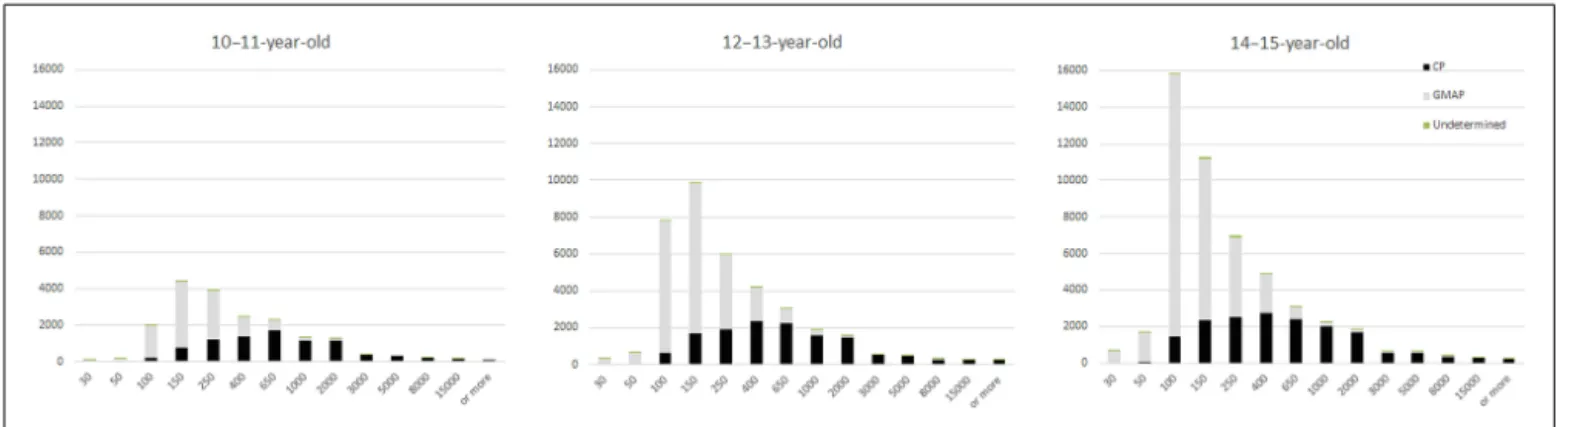 FIGURE 5 | Pause types identified in 10–11-year-old, 12–13-year-old, and 14–15-year-old texts.